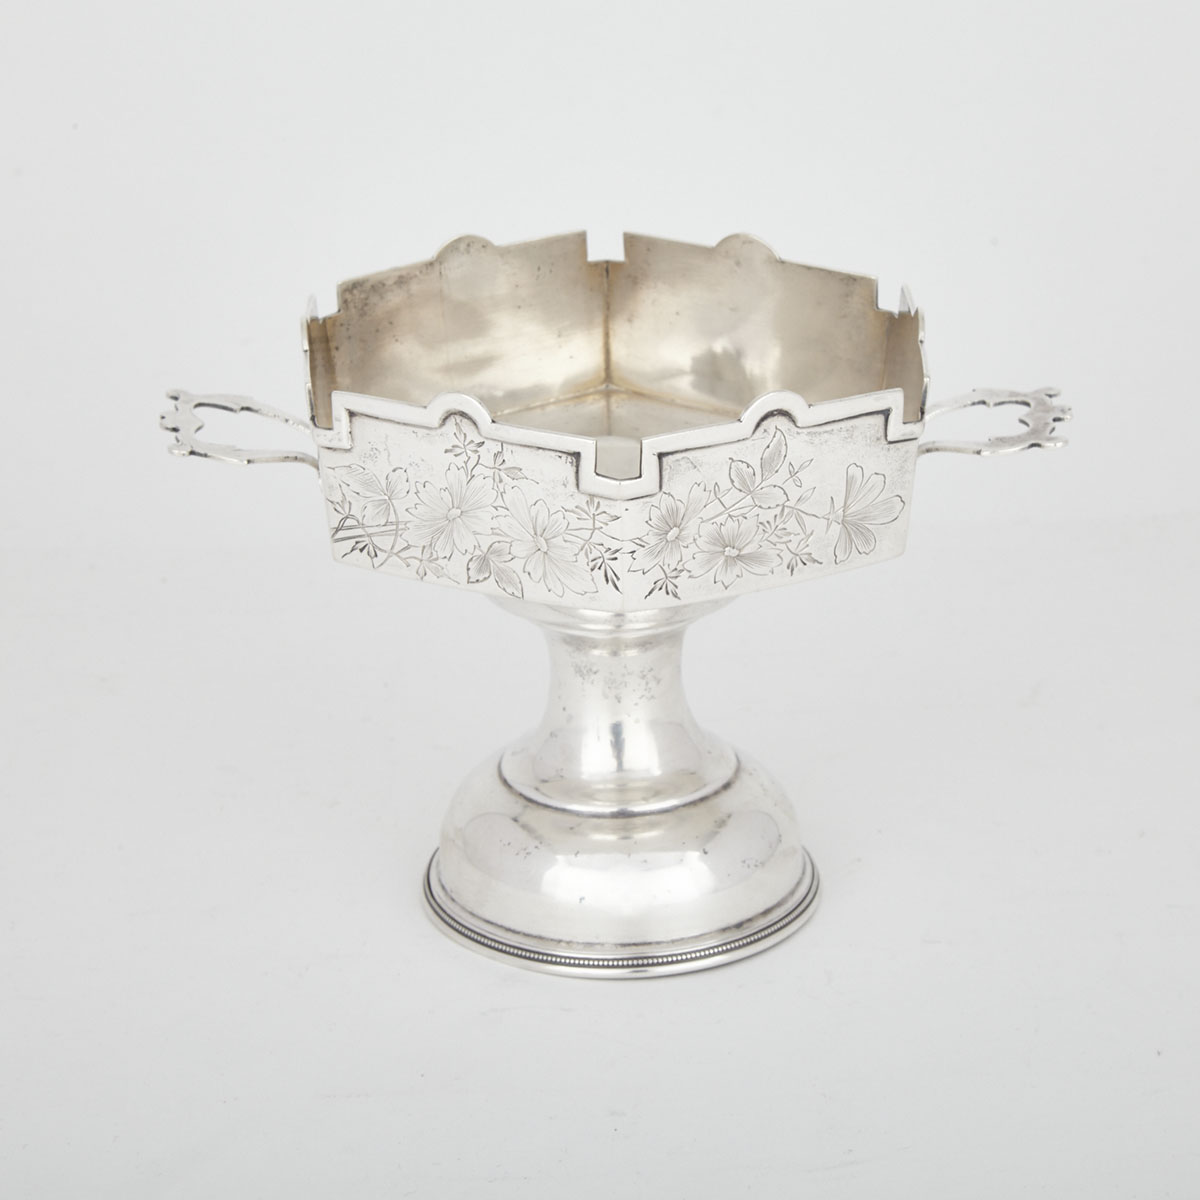 Russian Silver Two-Handled Hexagonal Comport, Moscow, c.1899-1908